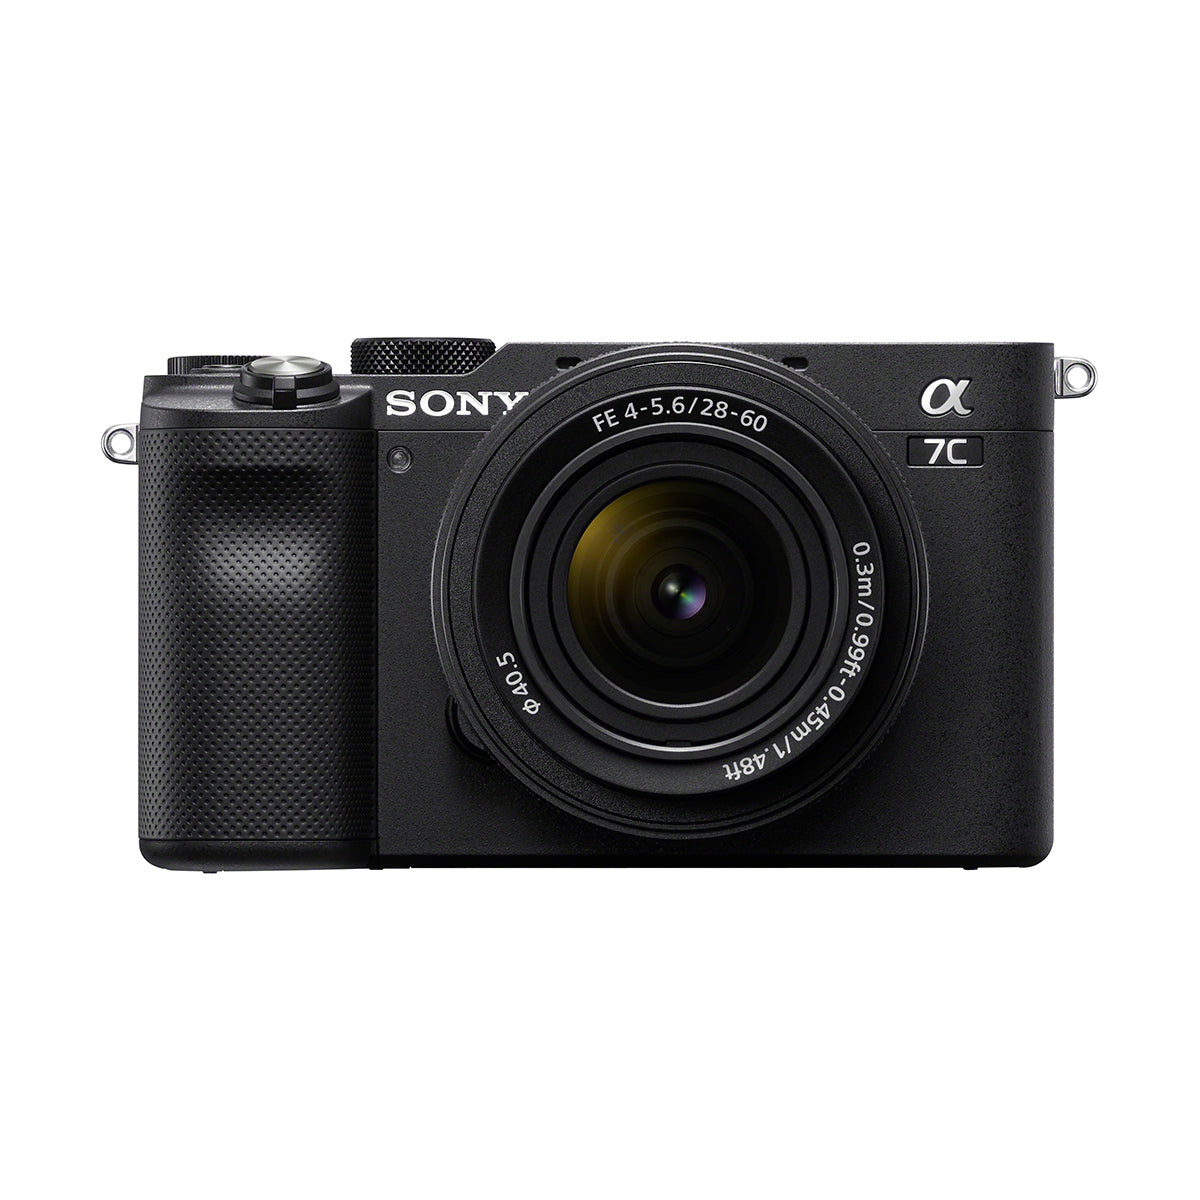 Sony Alpha a7C Full Frame Mirrorless Camera with FE 28-60mm f/4-5.6 Lens (Black)